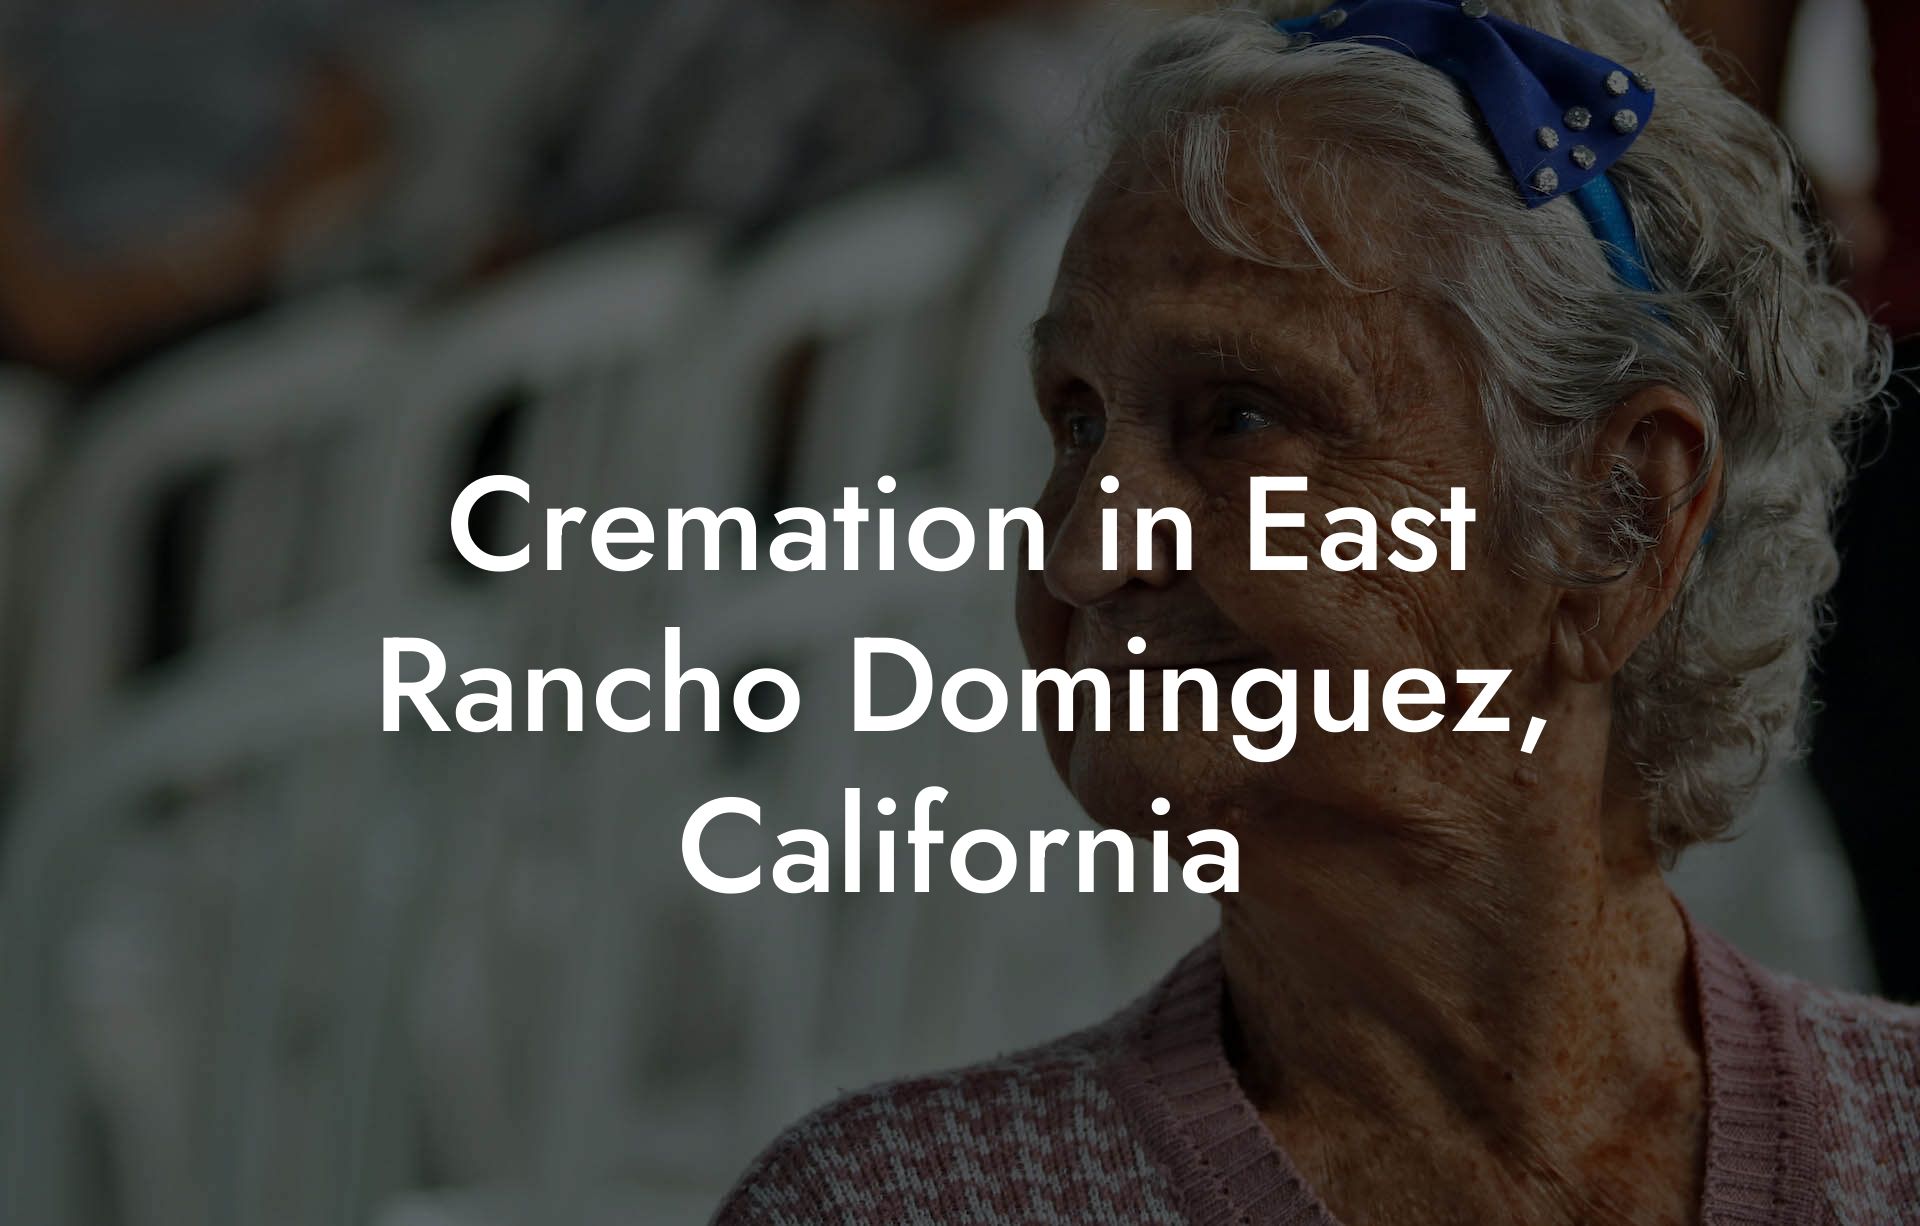 Cremation in East Rancho Dominguez, California